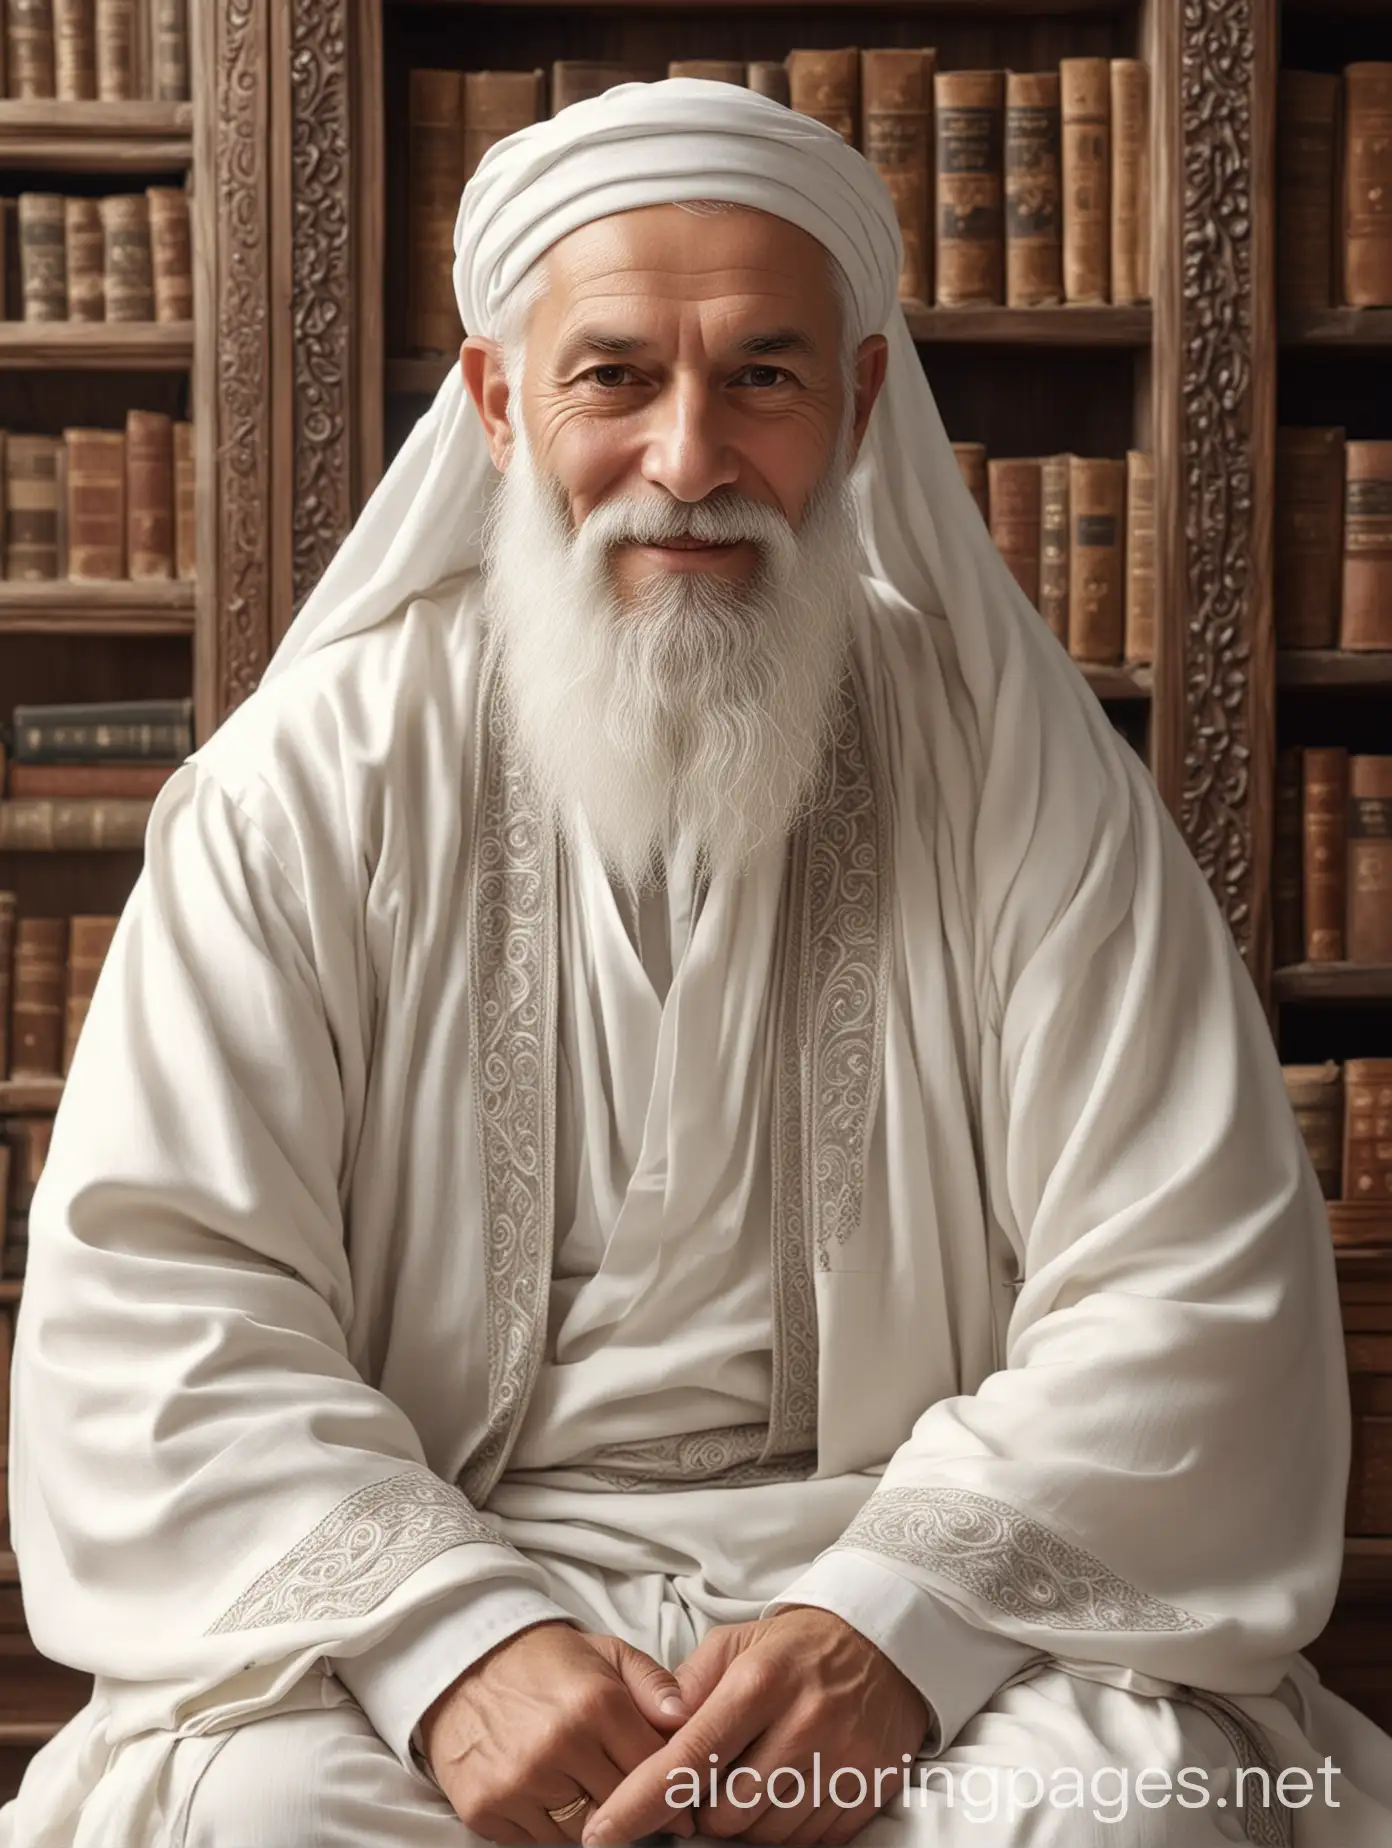 MiddleAged-Islamic-Scholar-Smiling-in-Old-Library-Realistic-4K-Vintage-Portrait